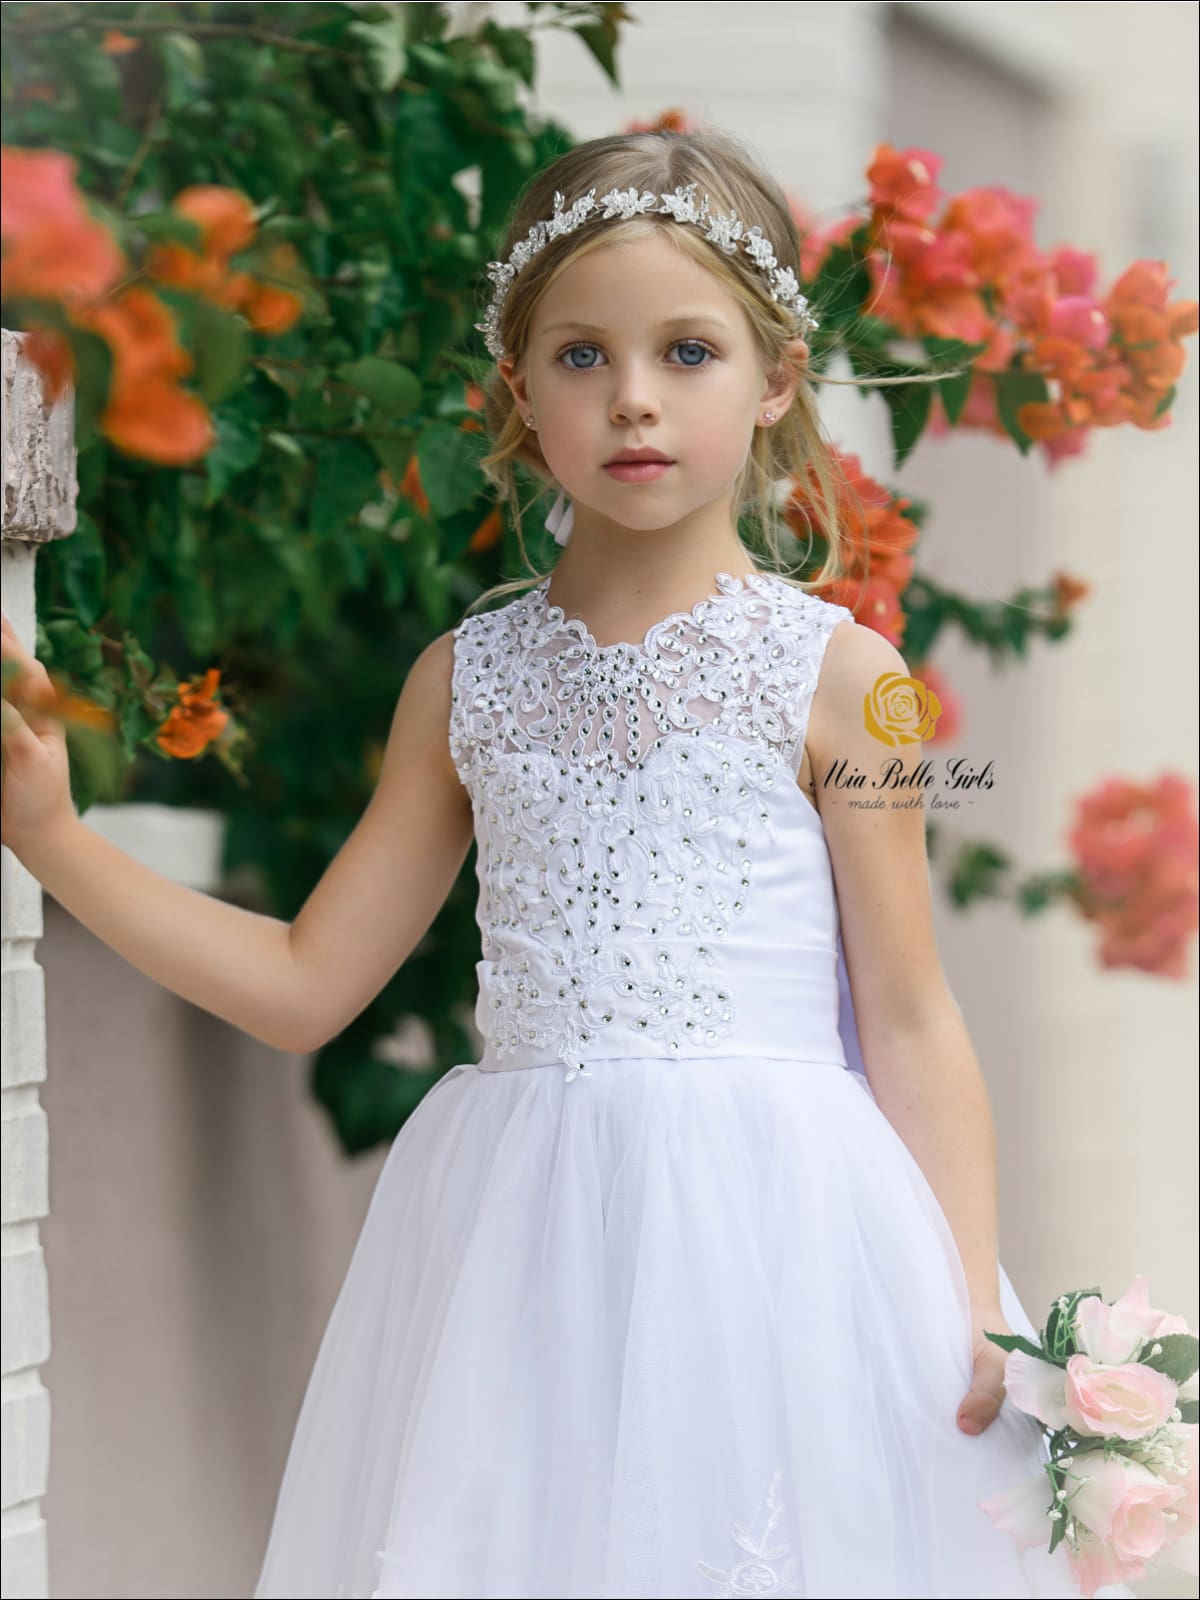 Lace Flower Girl Dress With Bow – Mia Belle Girls